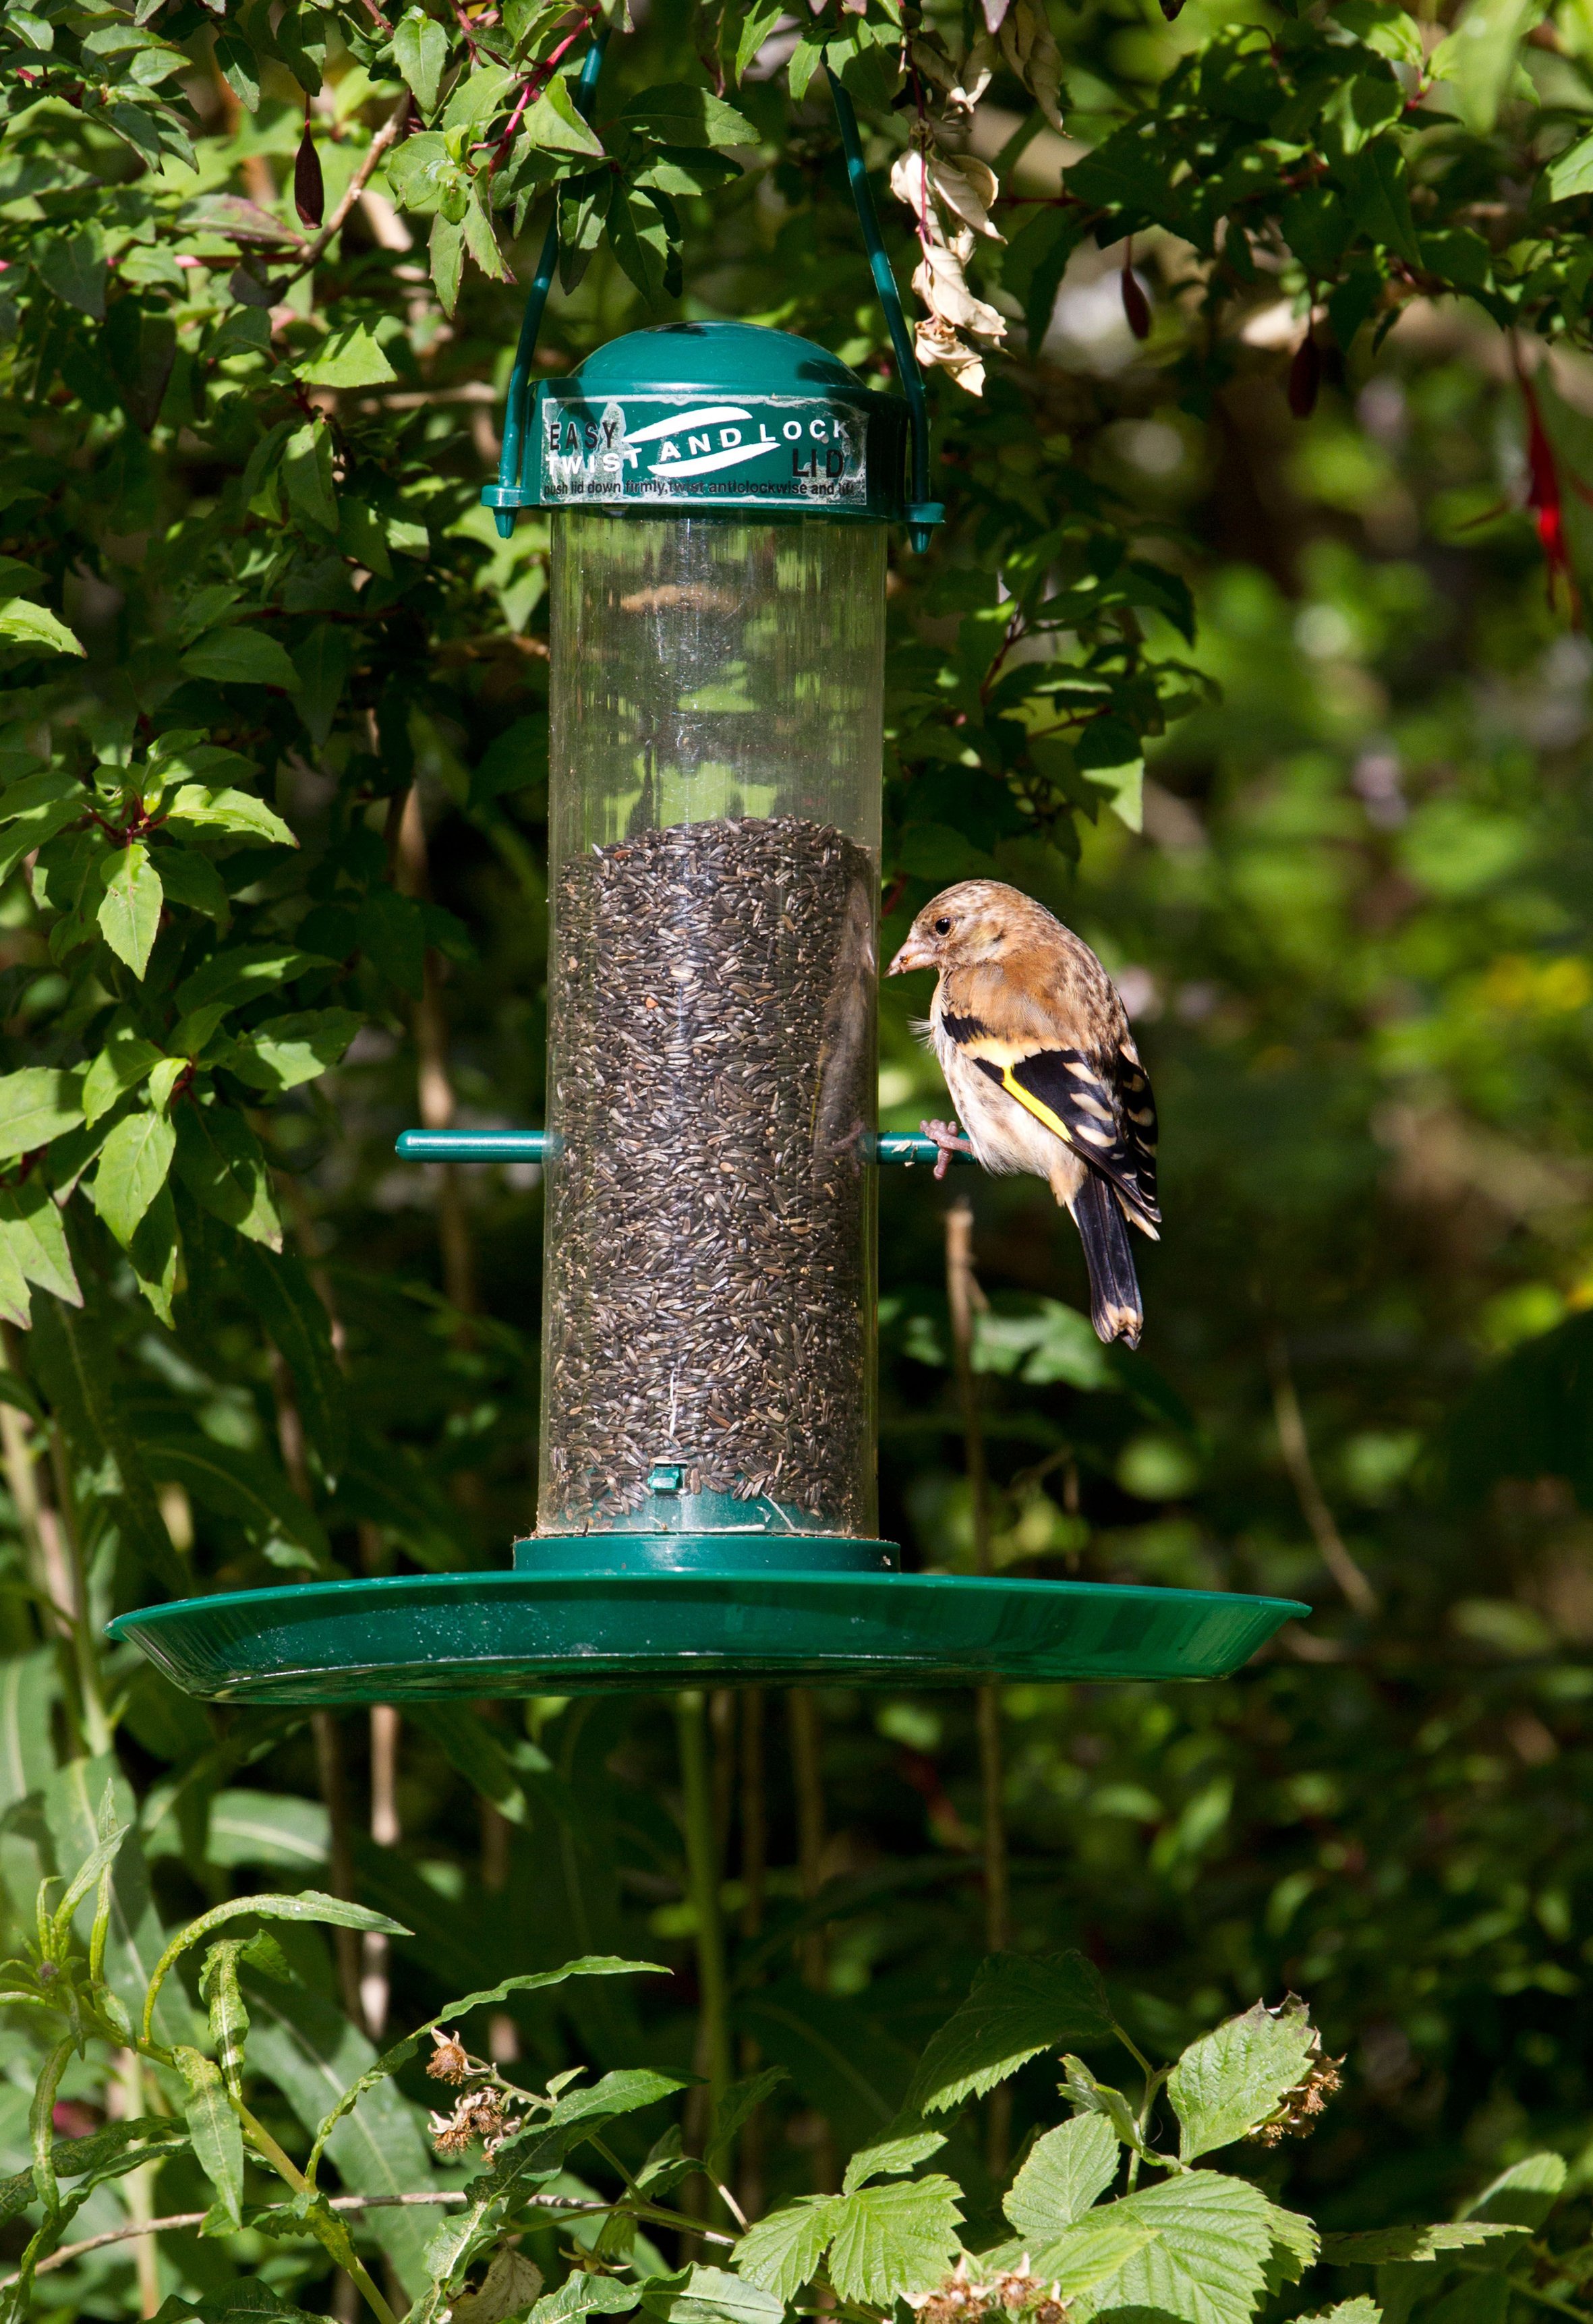 Hanging feeders fi lled with seed are ideal for smaller birds